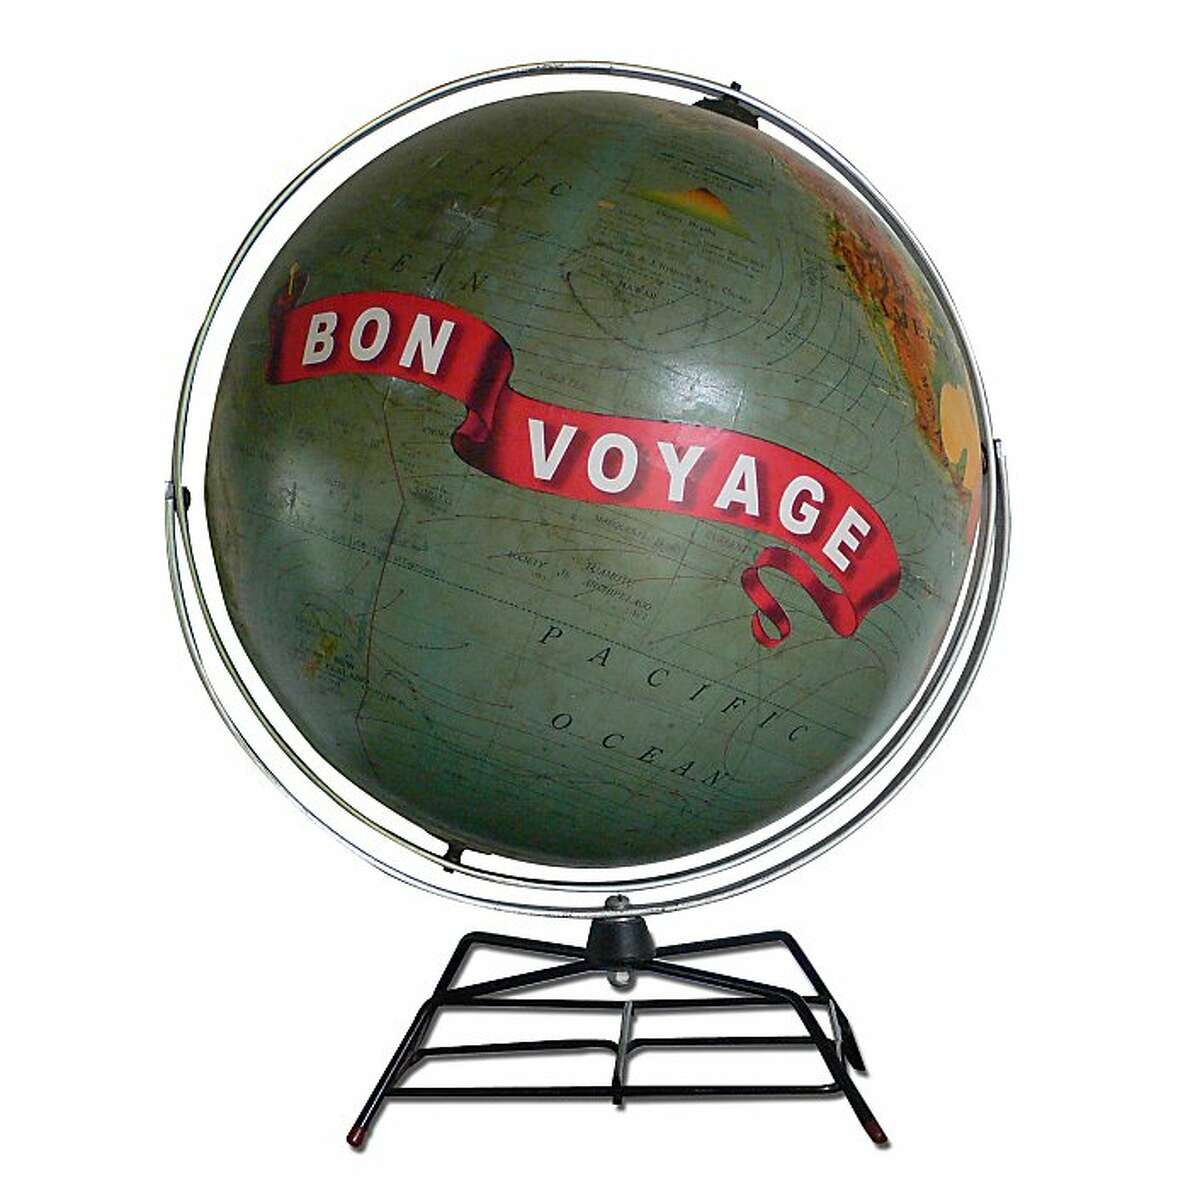 Wendy Gold creates both custom globes and a line of 19 basic designs with her line ImagineNations. She decoupages old globes with photos, hand-cut artwork and lettering to create unique and beautiful keepsakes. This is the Bon Voyage.